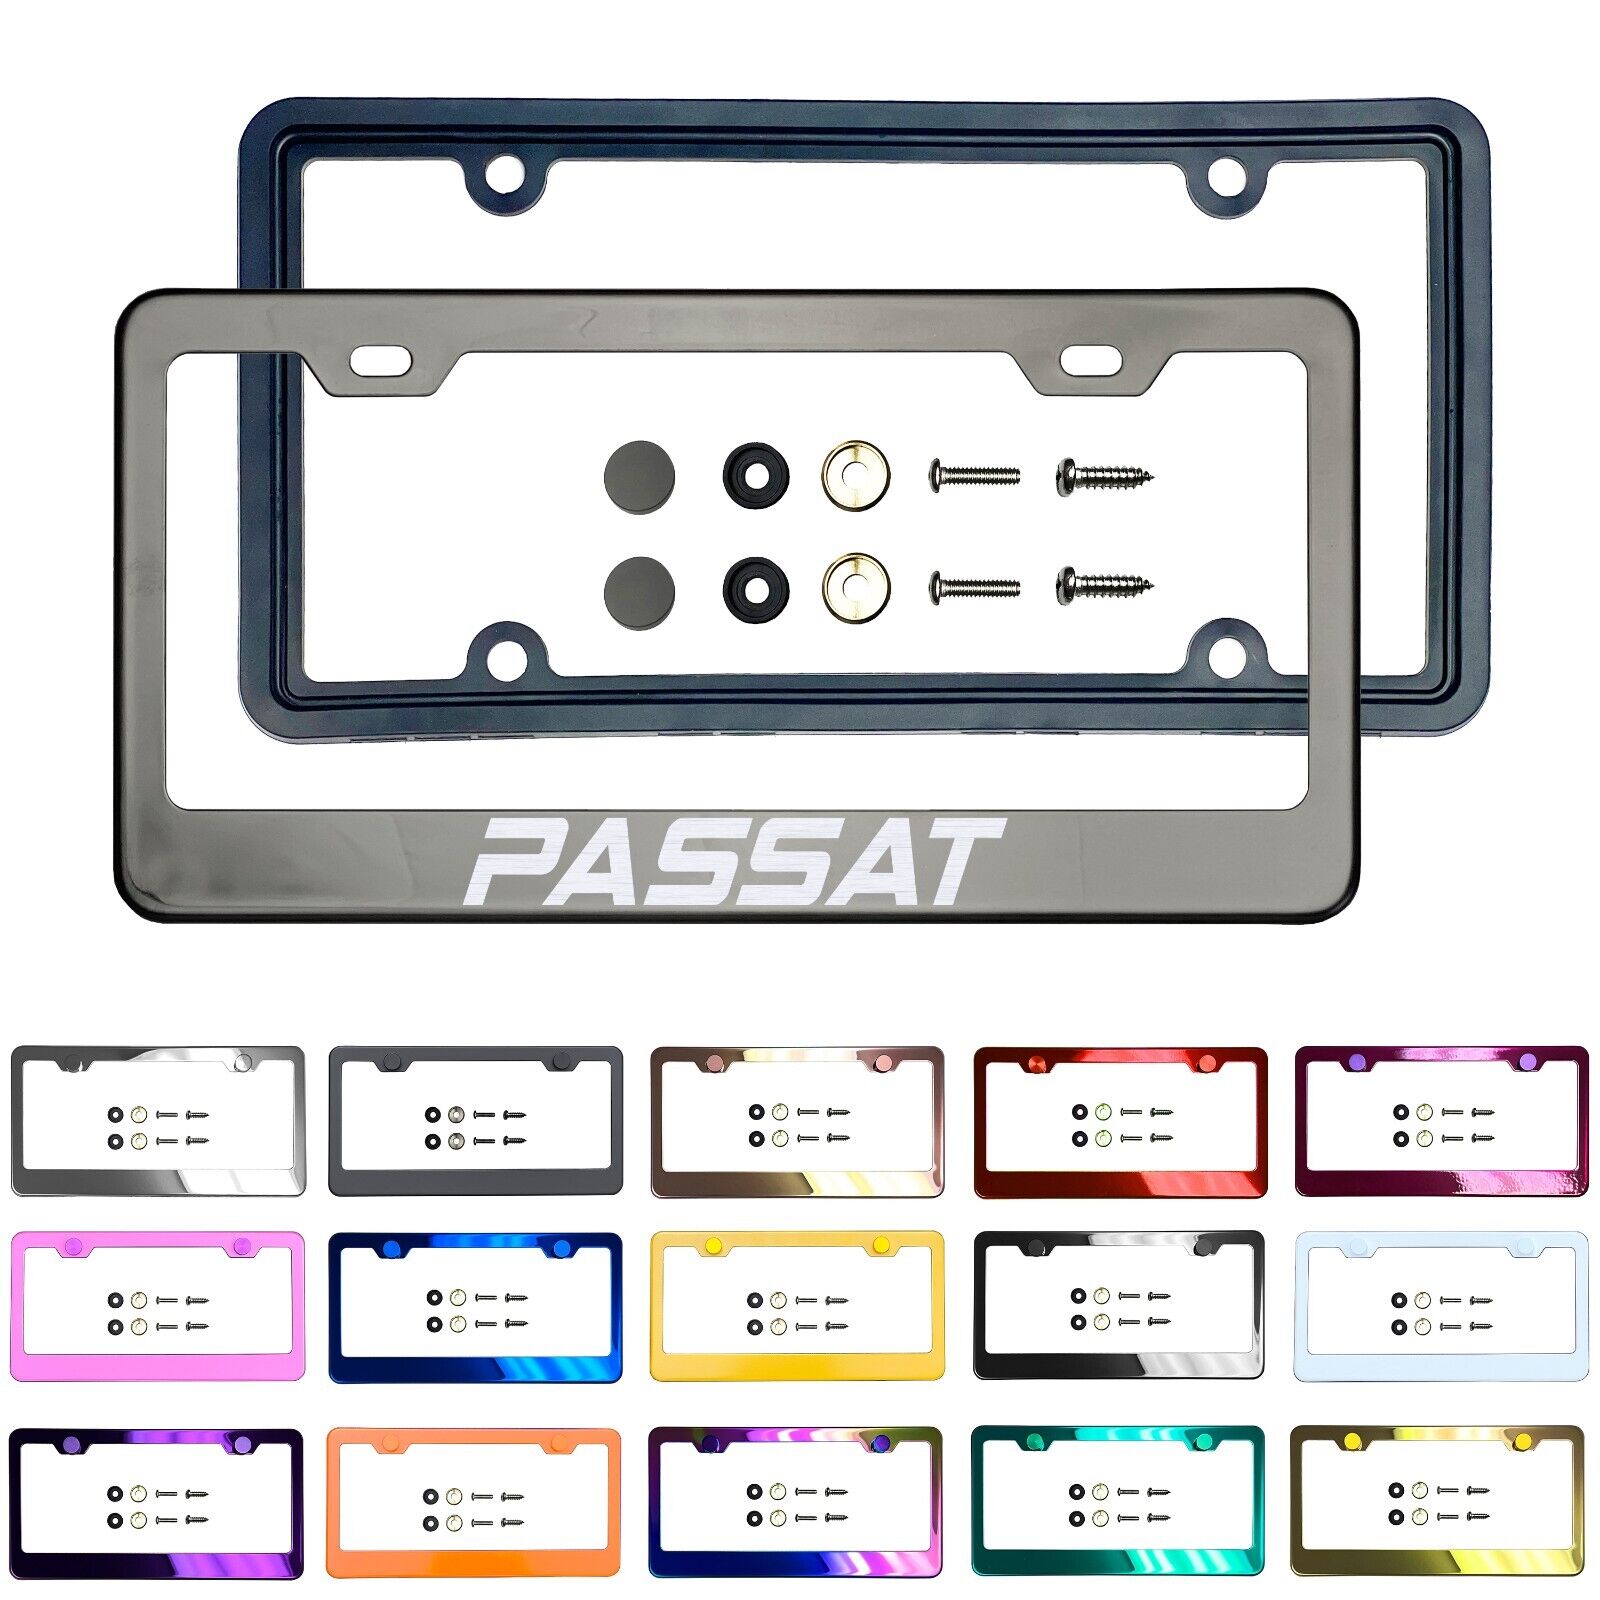 New Customize Stainless Steel License Frame Silicone Guard Fit Volkswagen Passat